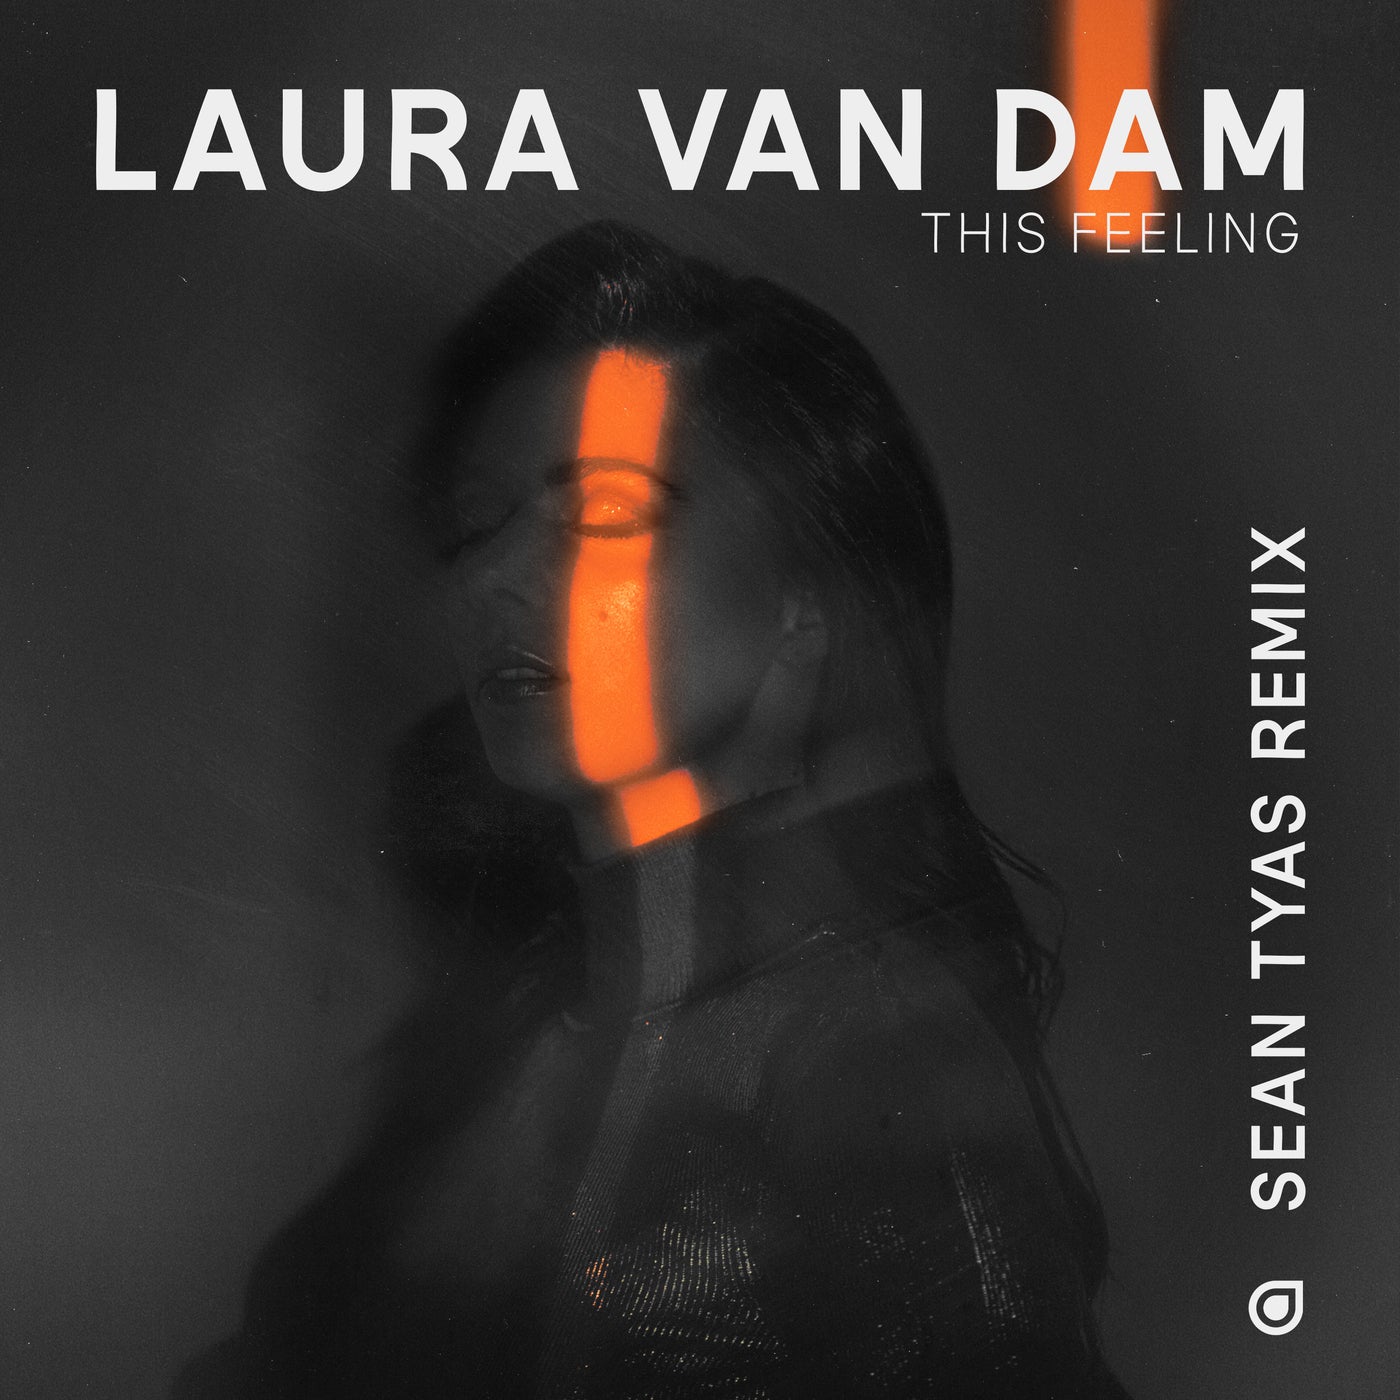 Cover - Laura van Dam - This Feeling (Sean Tyas Extended Remix)